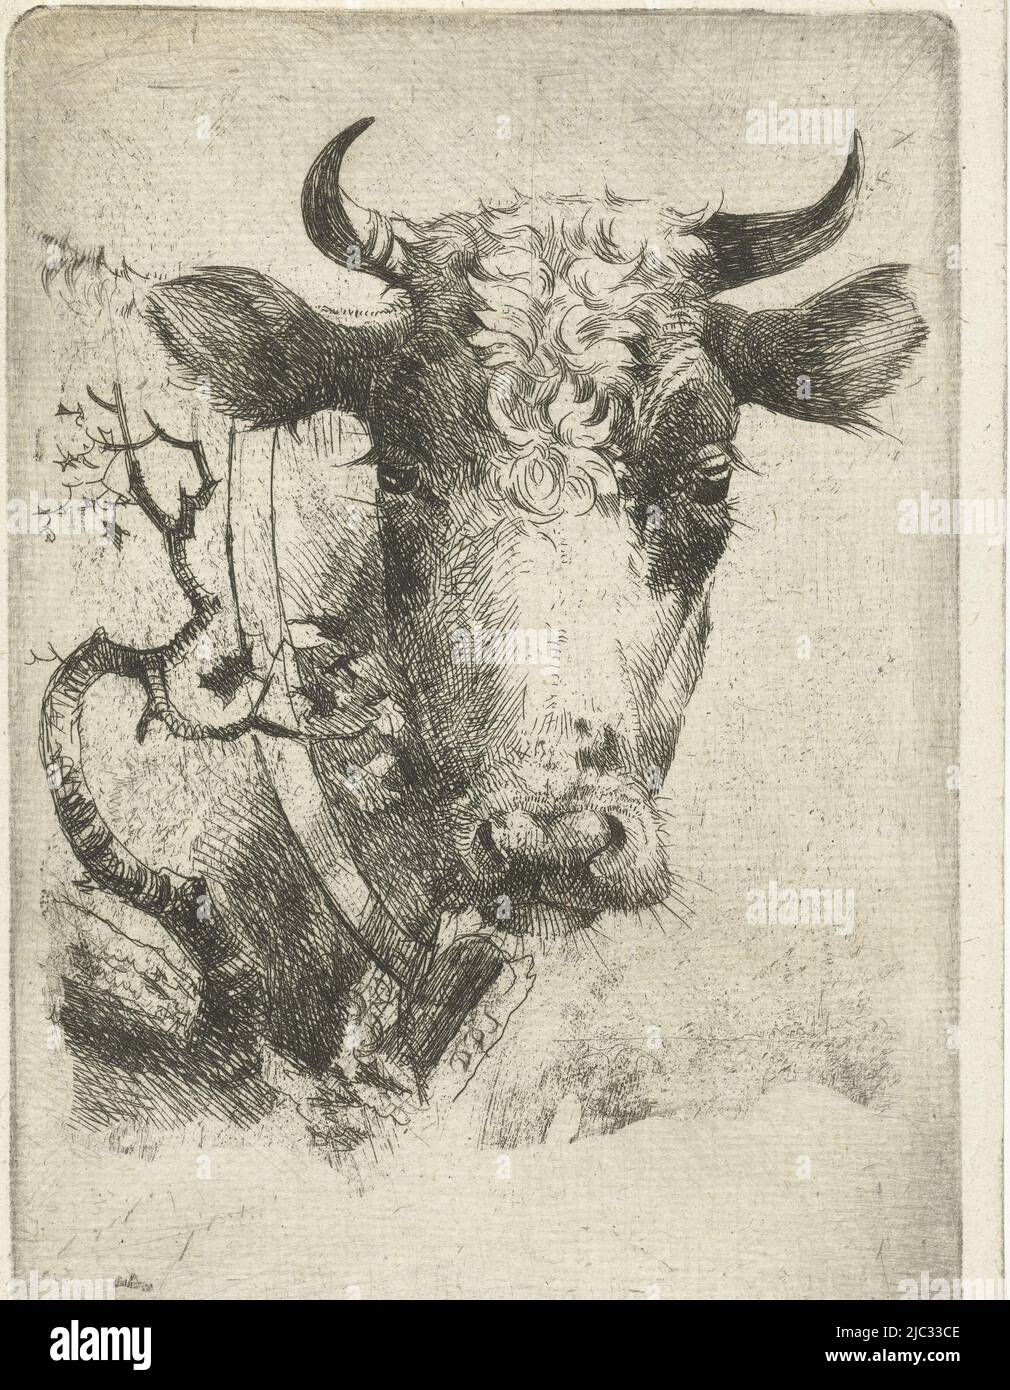 Head of Cow with Necklace, print maker: Dirk Dirksen, Rotterdam, 1821 - 1885, paper, etching, h 129 mm × w 91 mm Stock Photo